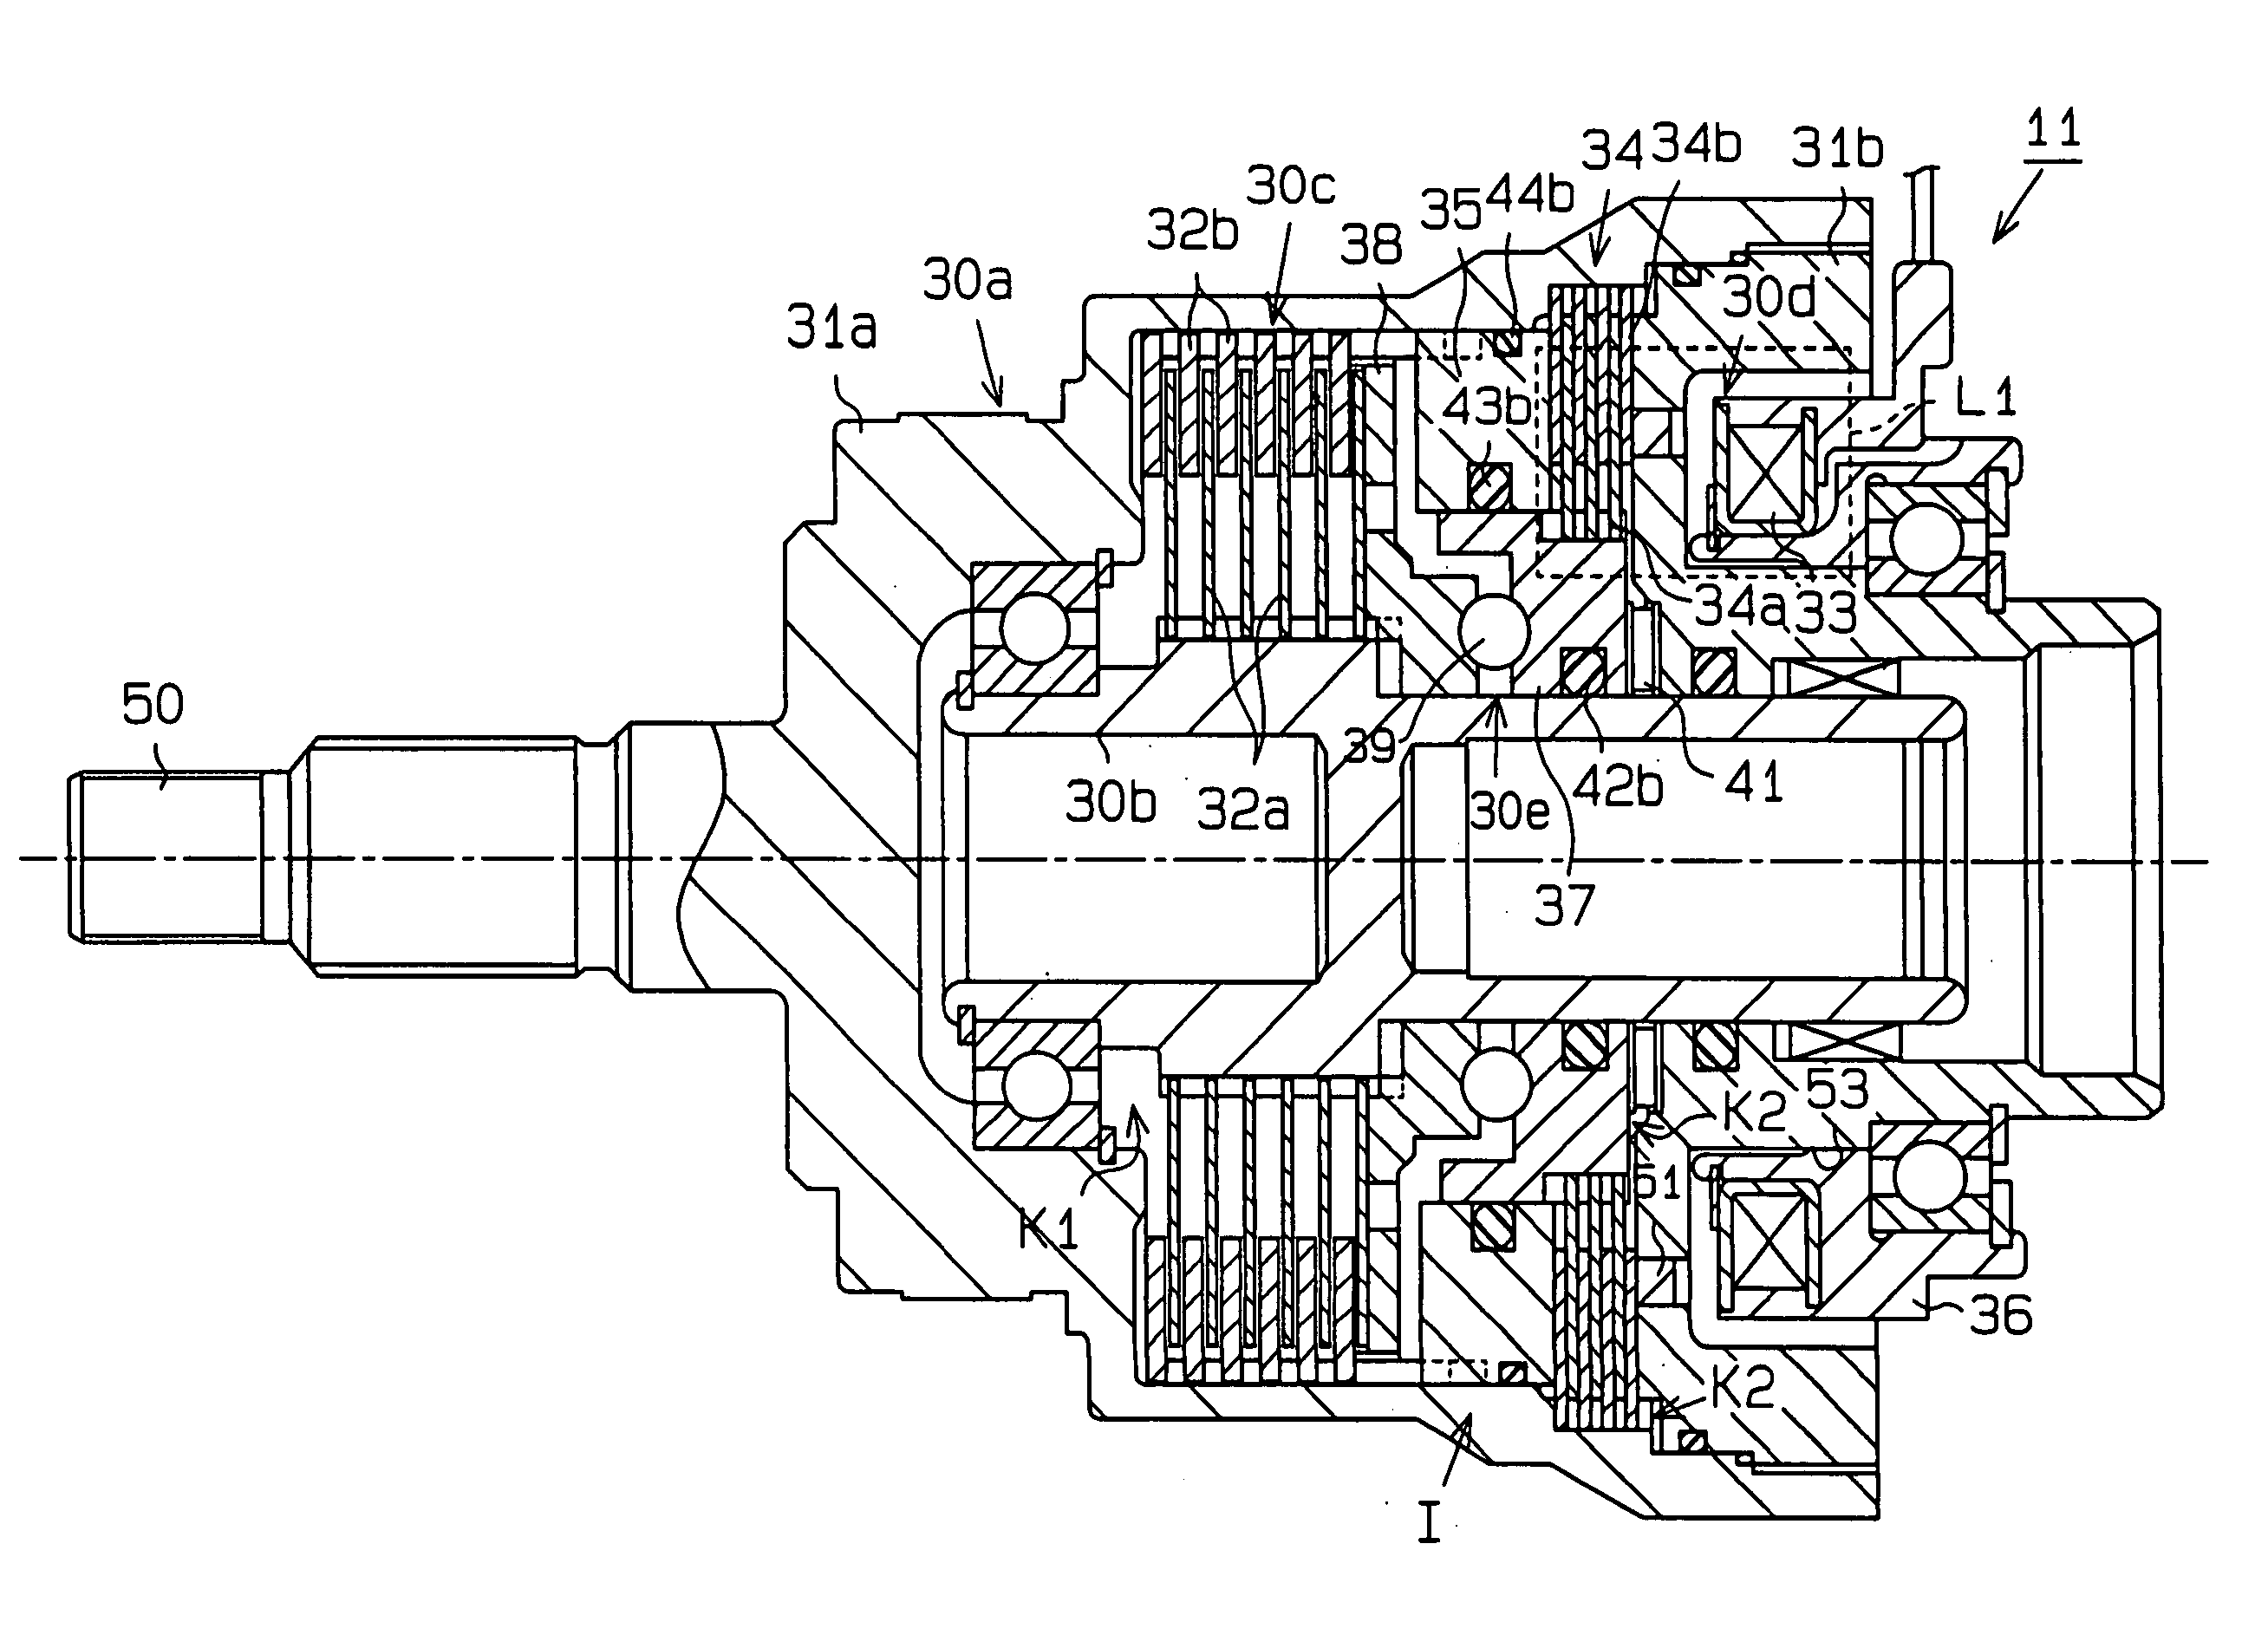 Clutch plate, friction clutch, and coupling device